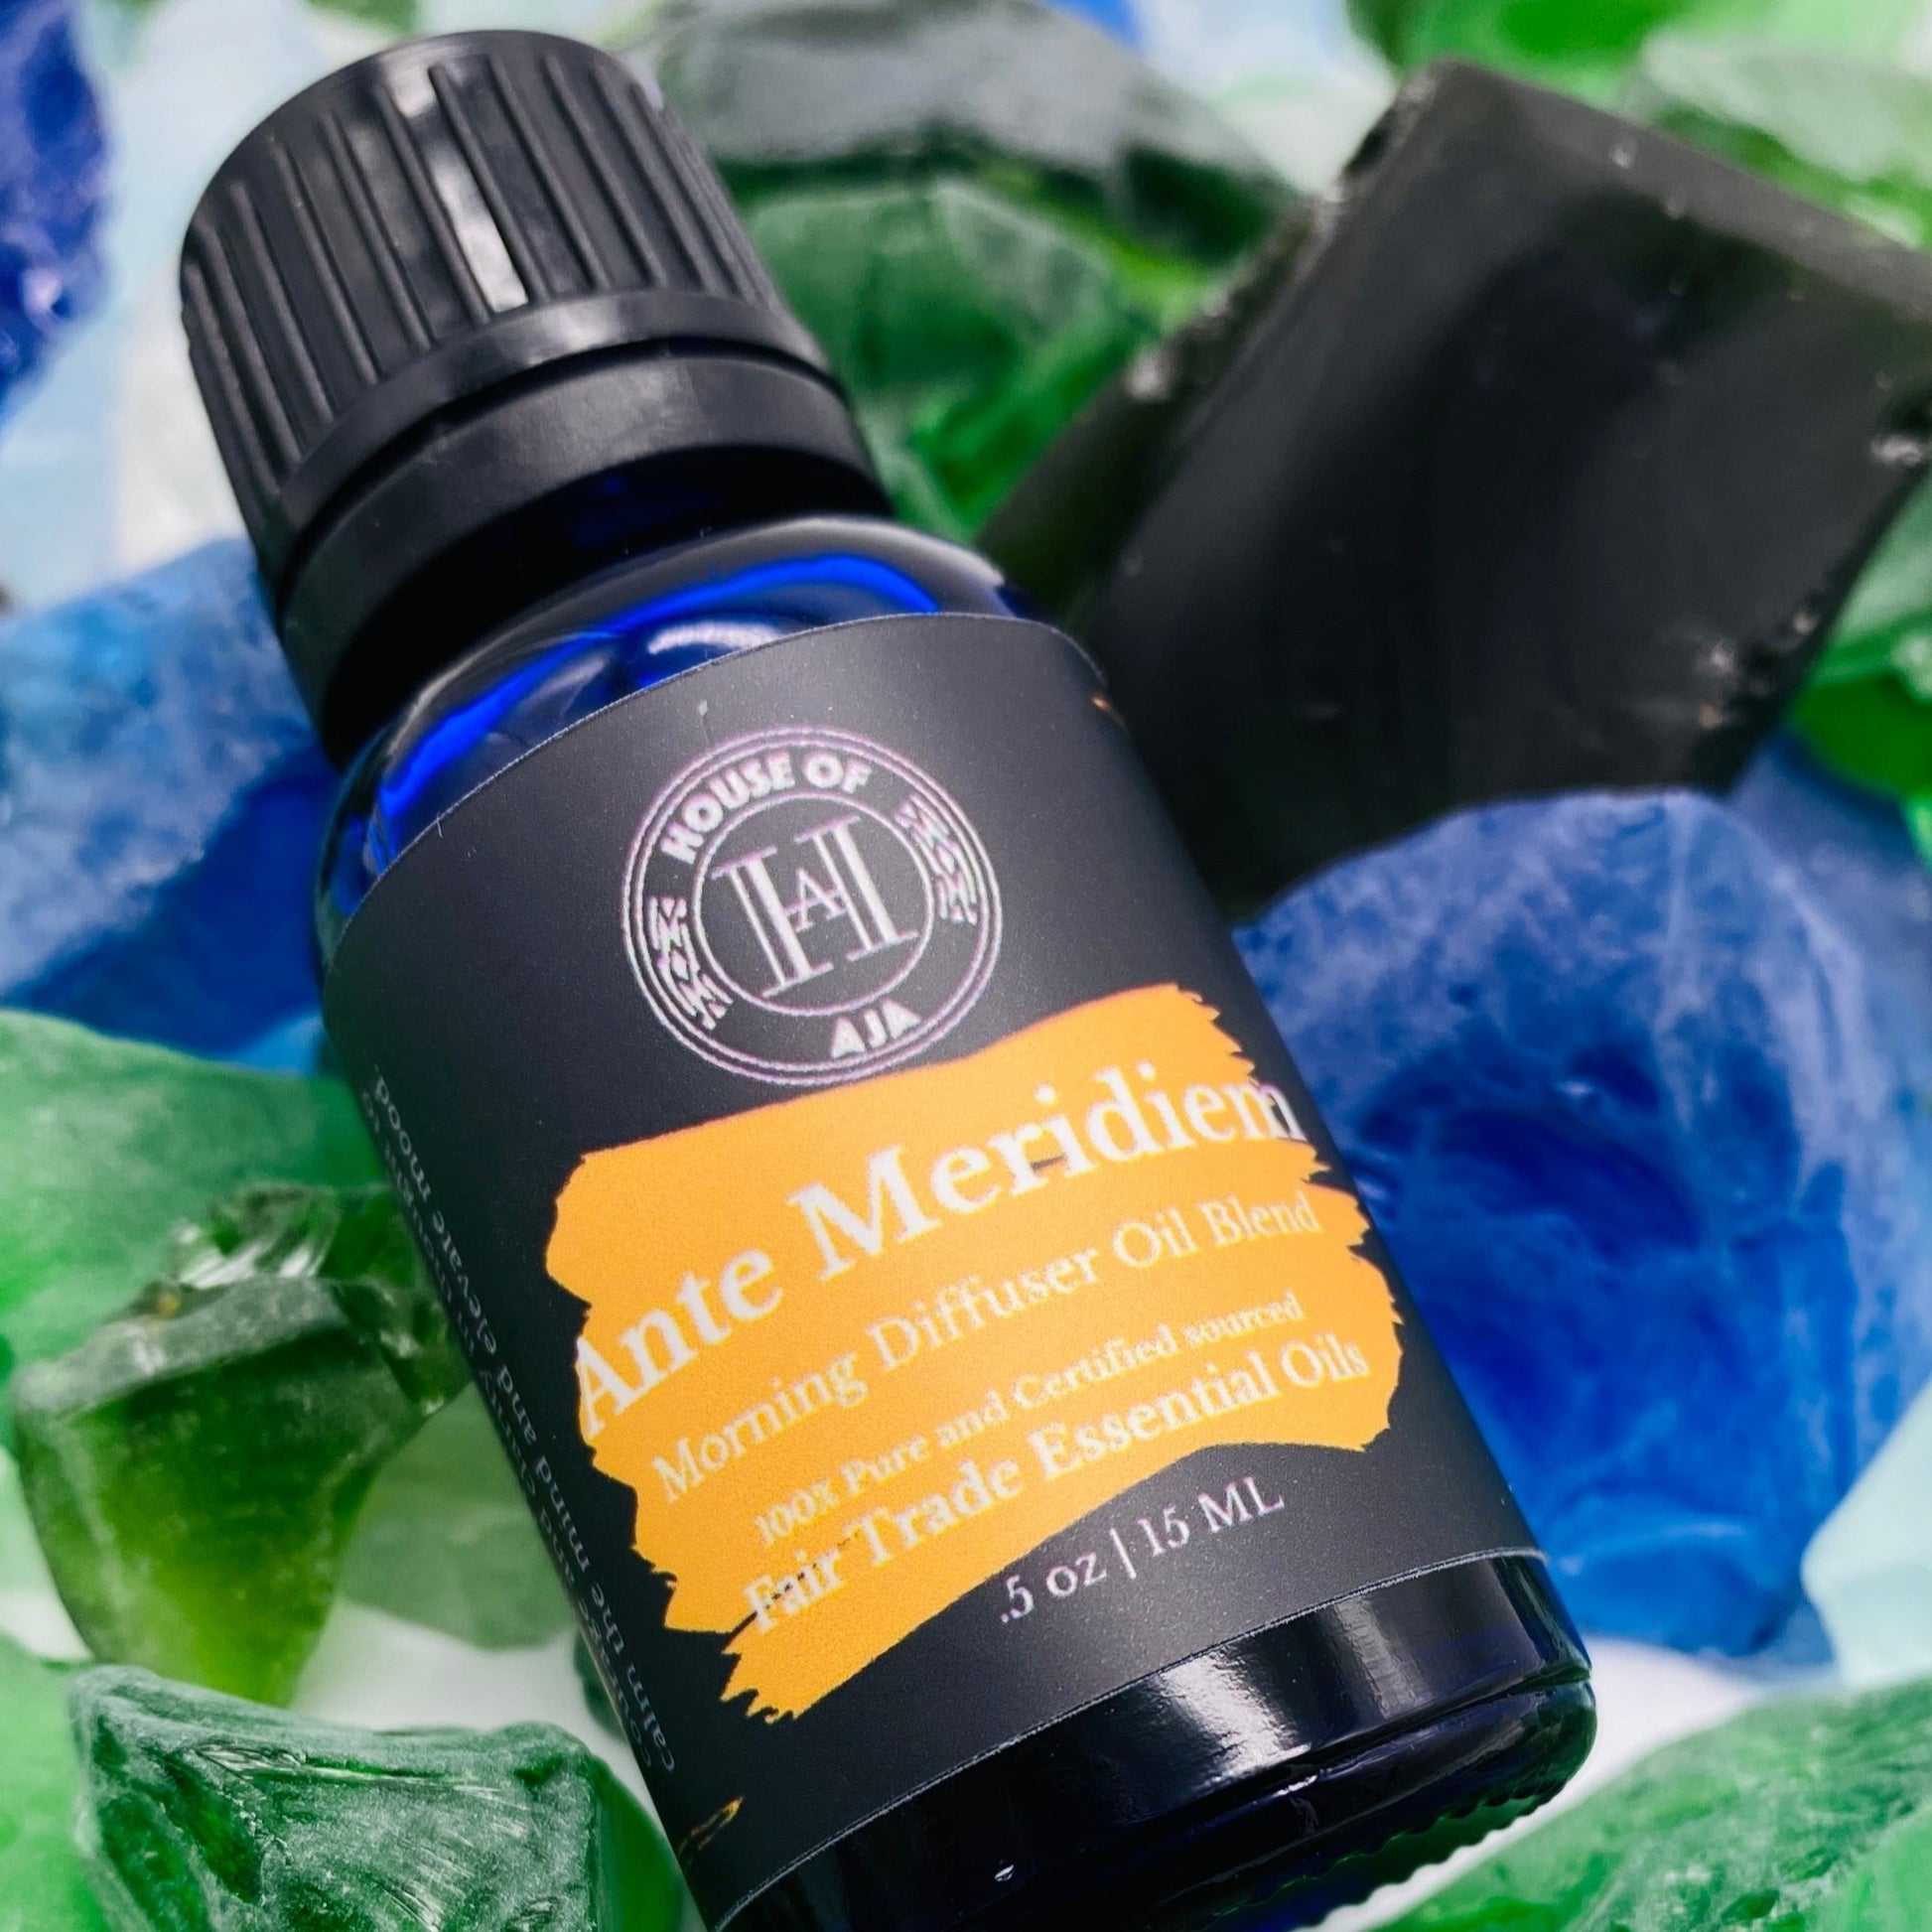 Ante Meridiem is our essential oil diffuser blend that we diffuse in the early mornings. Blended with Patchouli, Clove Bud, Clary Sage and Bergamot to promote courage and clarity in thought. 